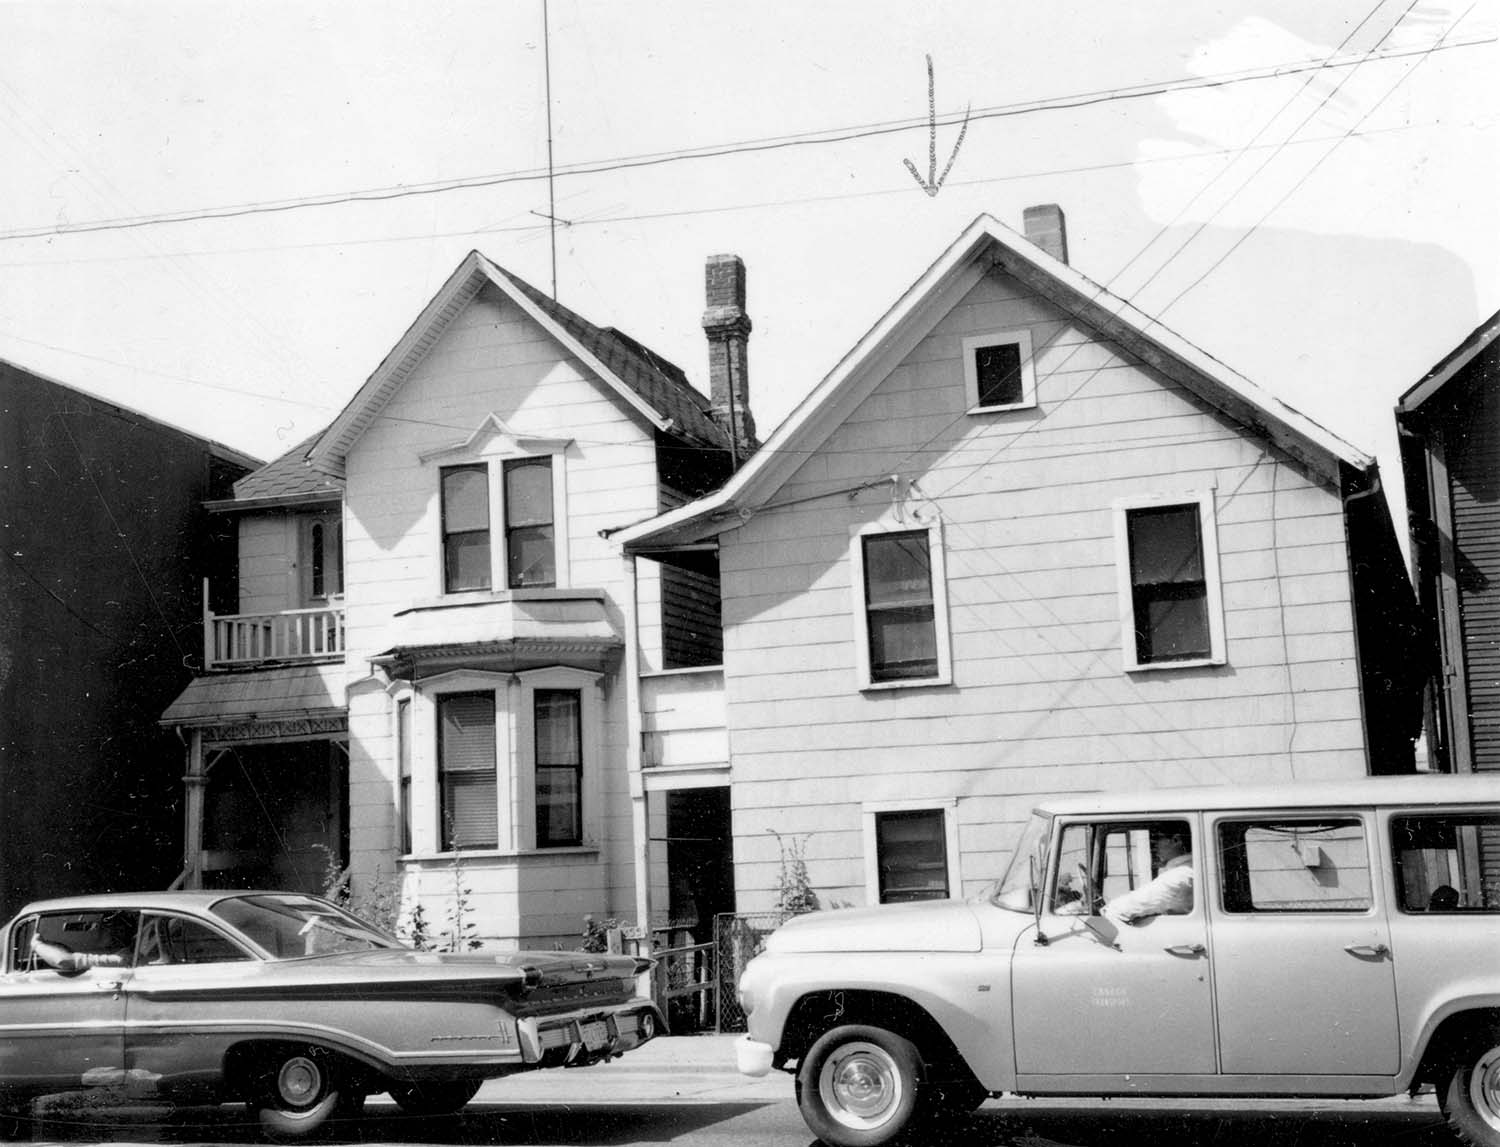 255 Prior Street, front, 1968. Photograph also shows 251 Prior Street. Reference code COV-S168-: CVA 203-26